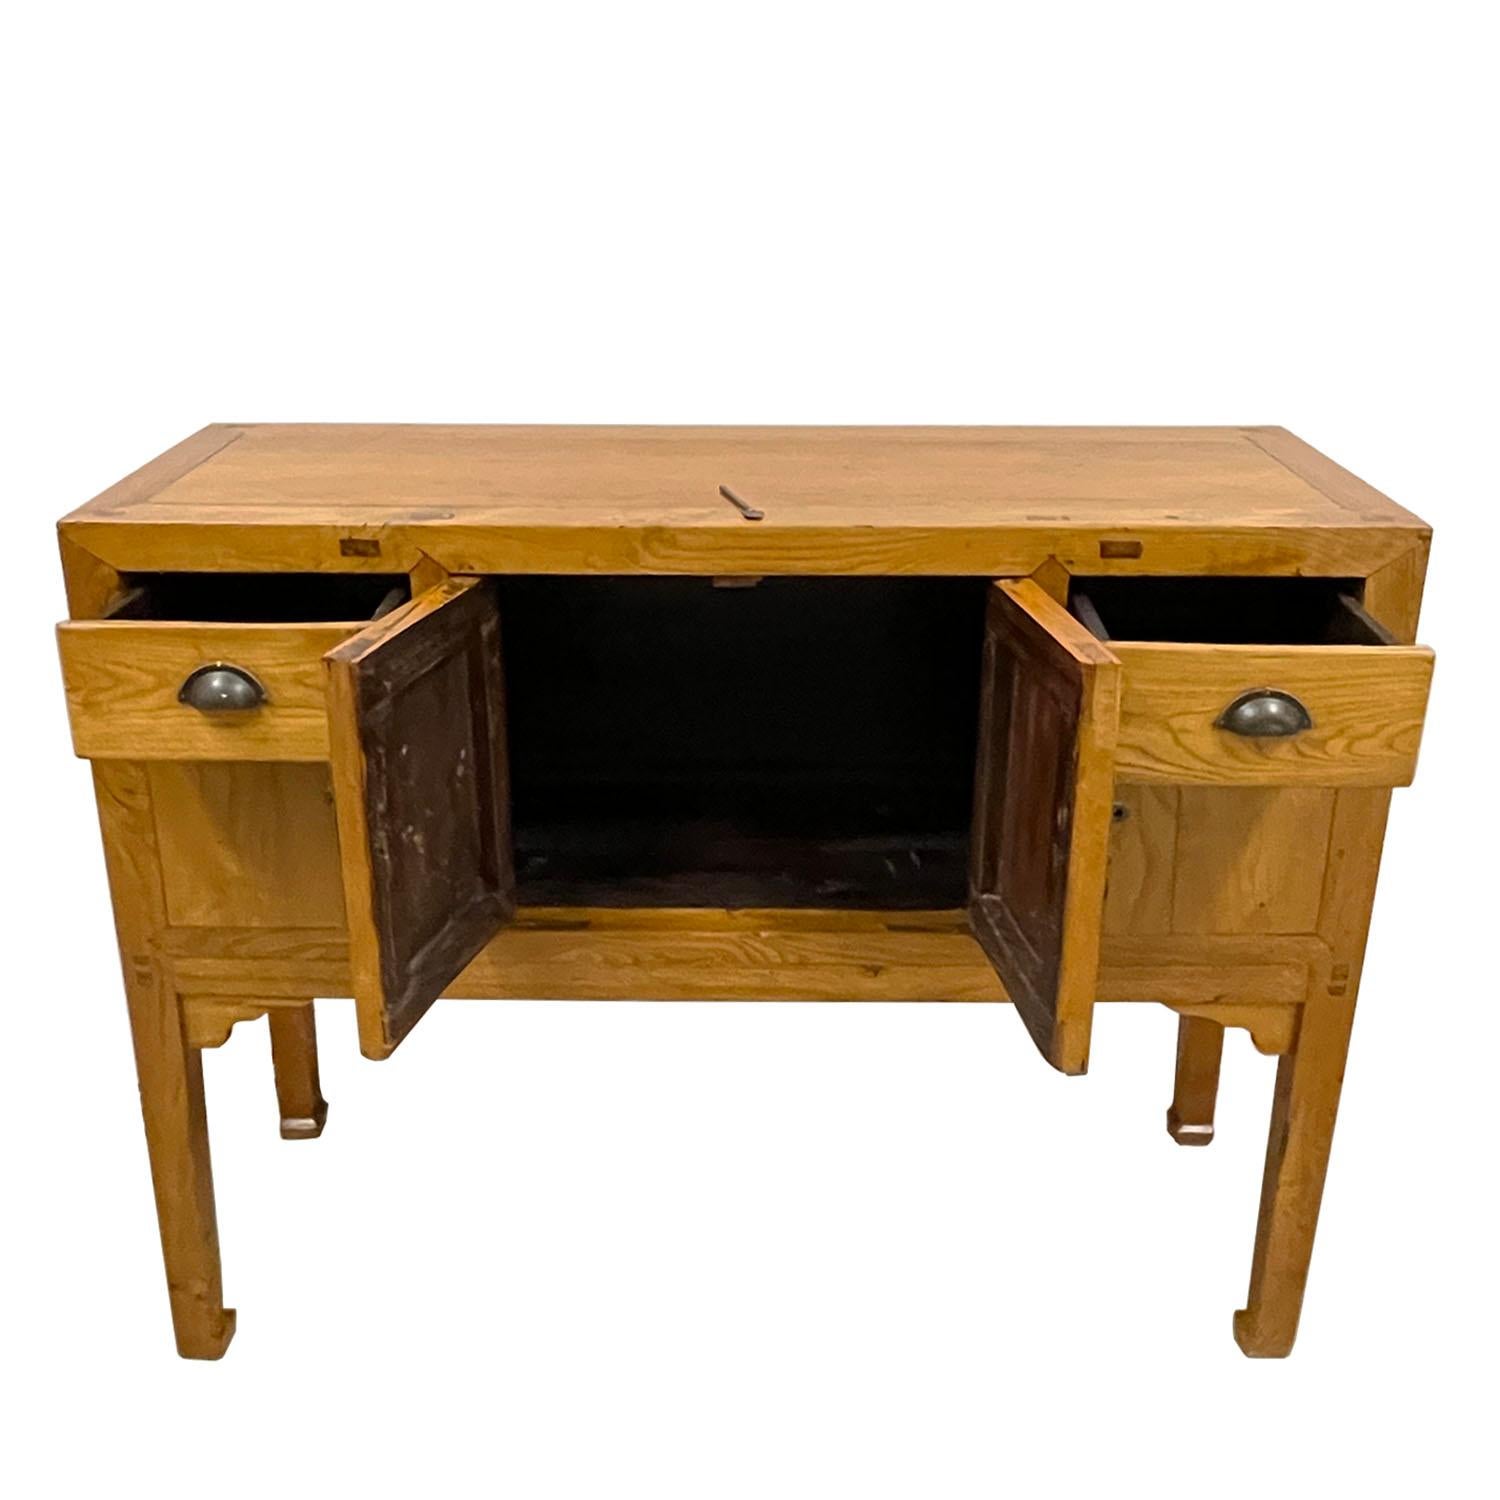 This Antique Chinese Entry Console/Side Table has about 150 years history with natural finish. It is made from solid elm wood with beautiful antique hardware on the front. It featured 2 Drawers and 2 removable open doors on the front. Heavy and